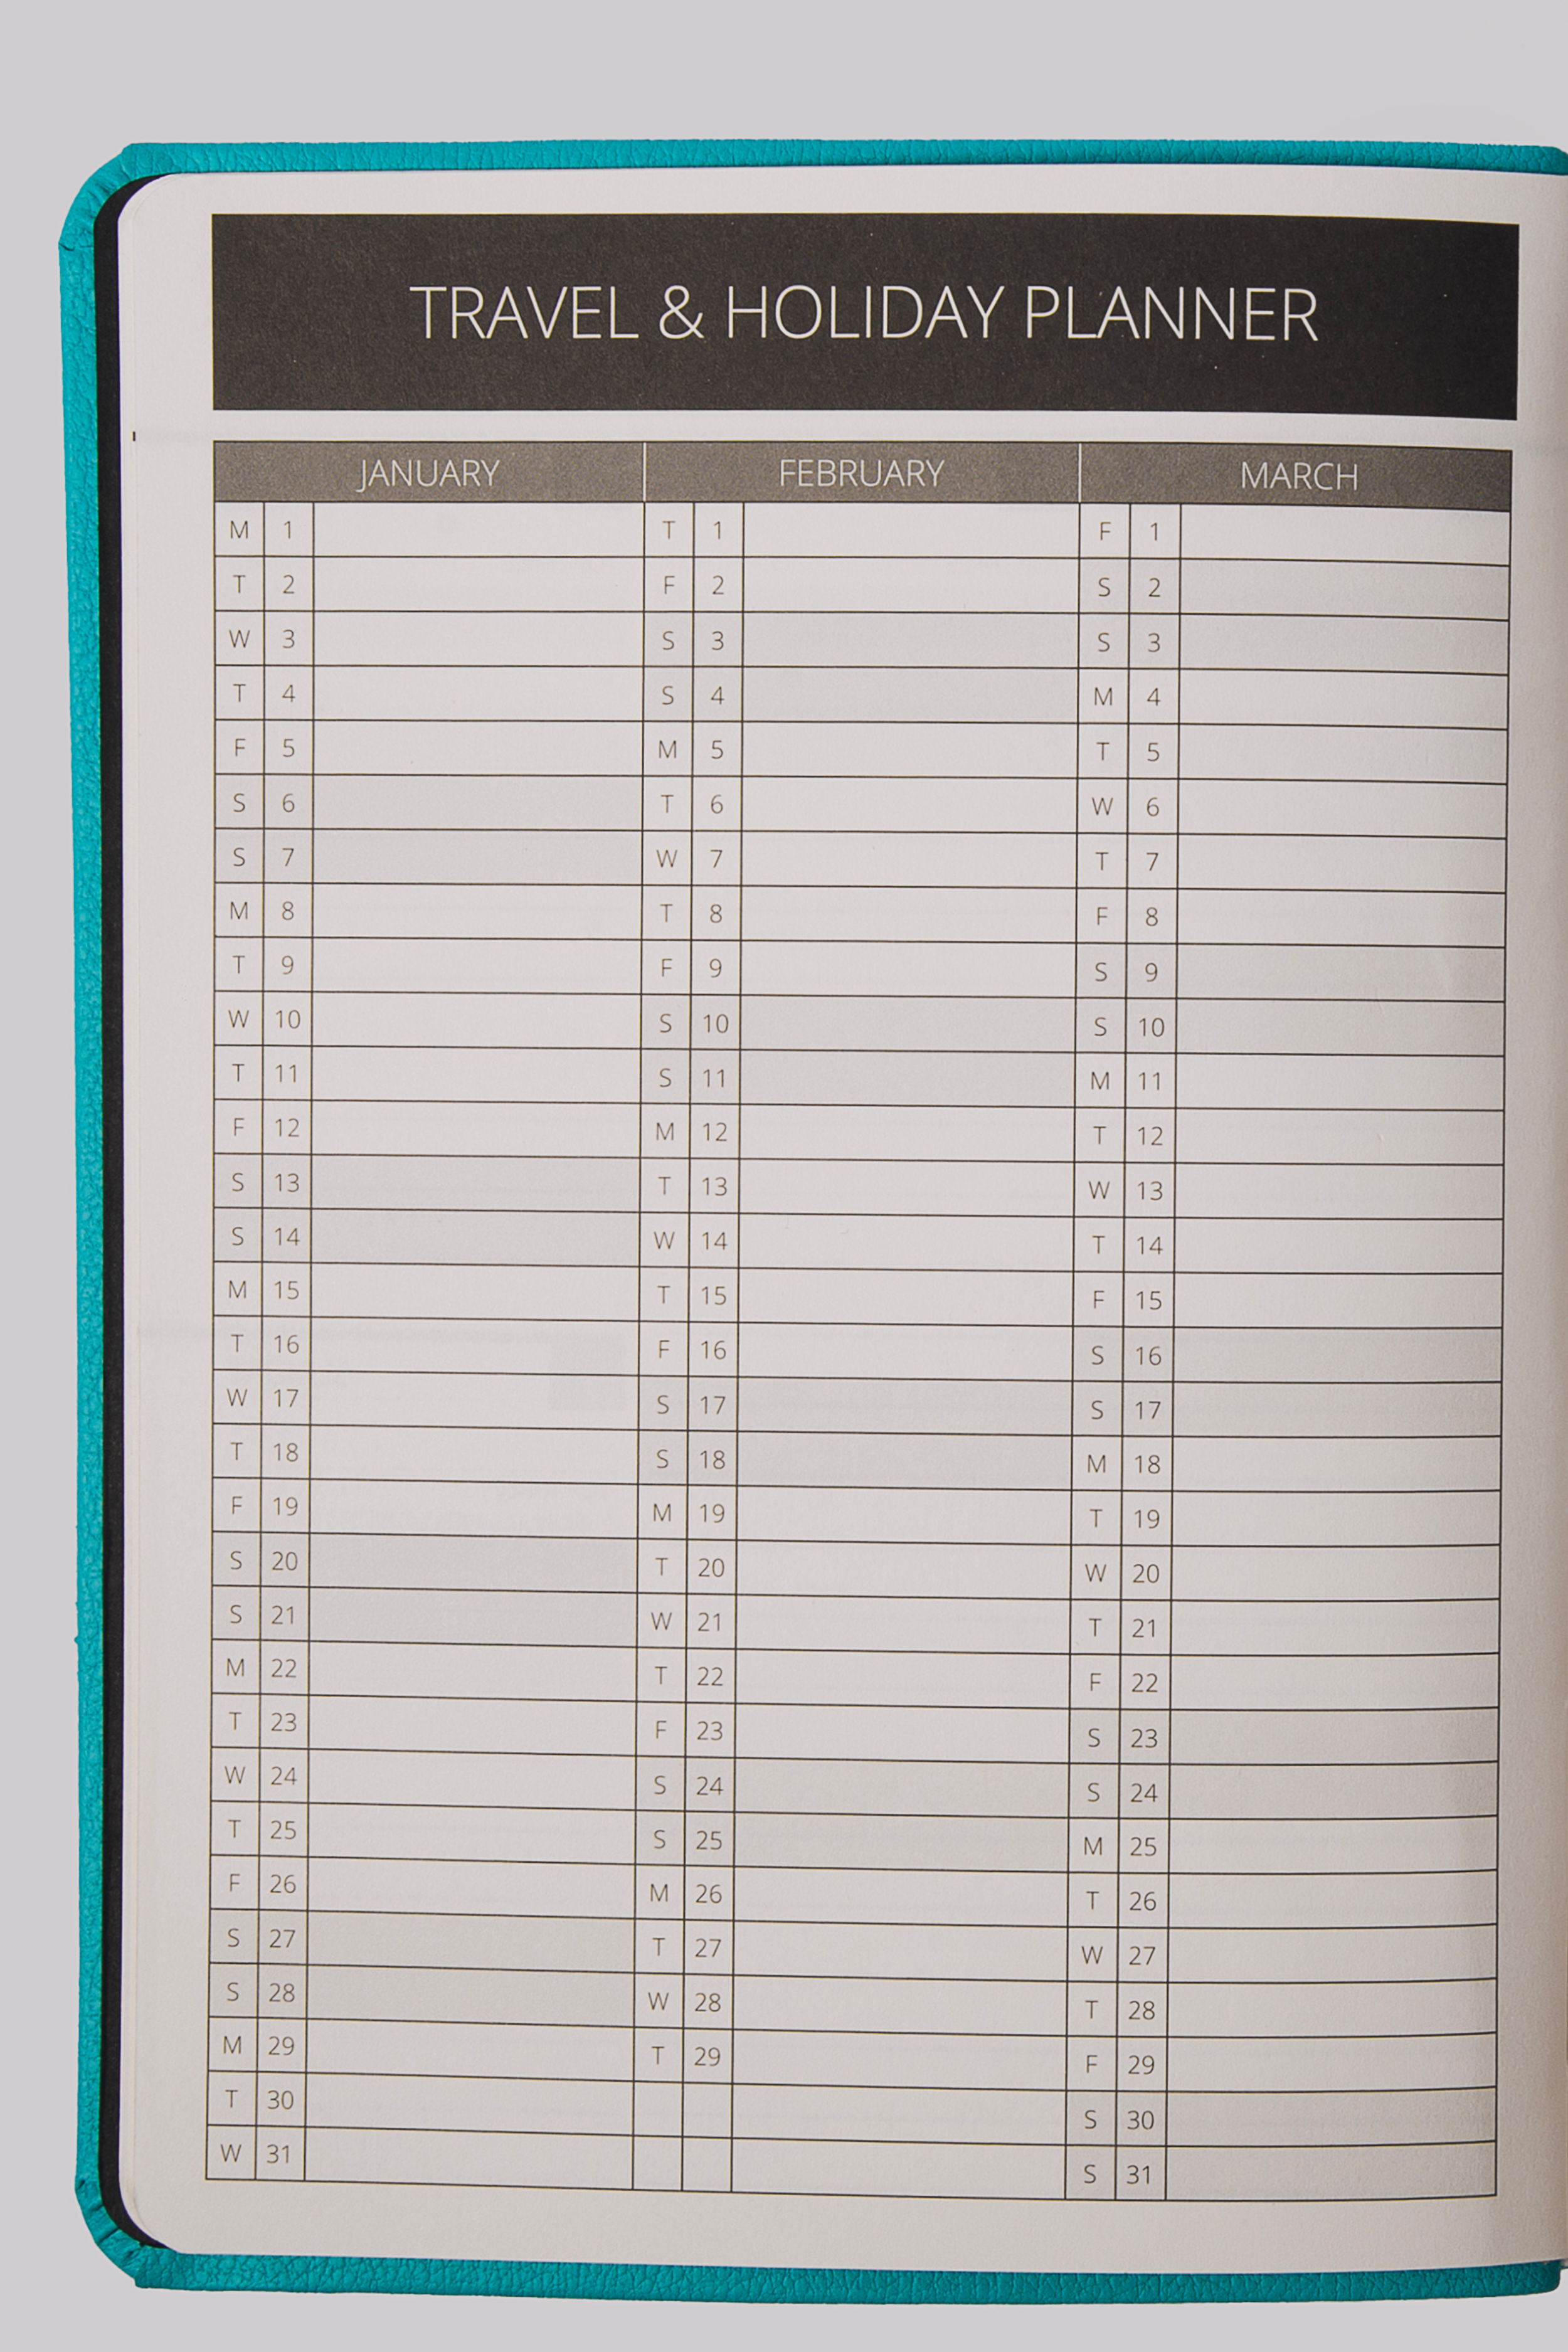 2024 Mental Fitness & Wellbeing Diary